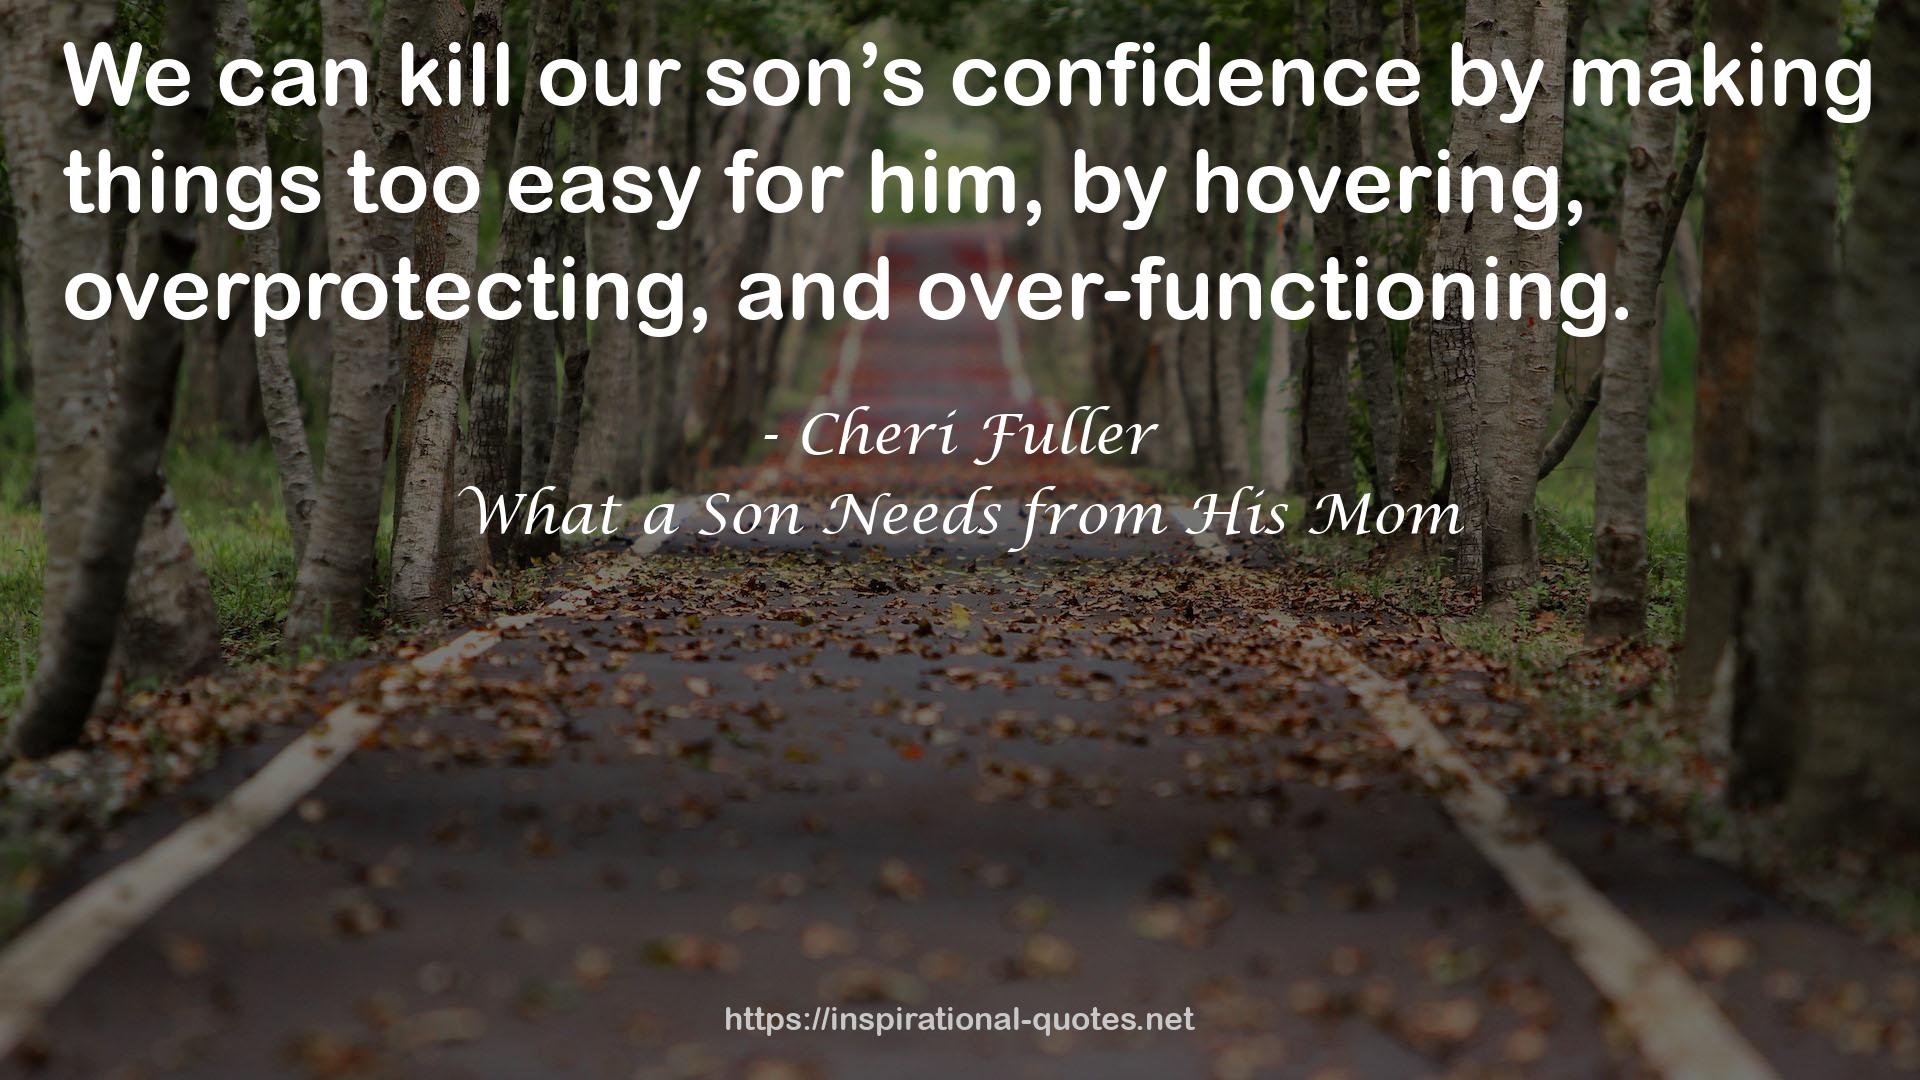 What a Son Needs from His Mom QUOTES